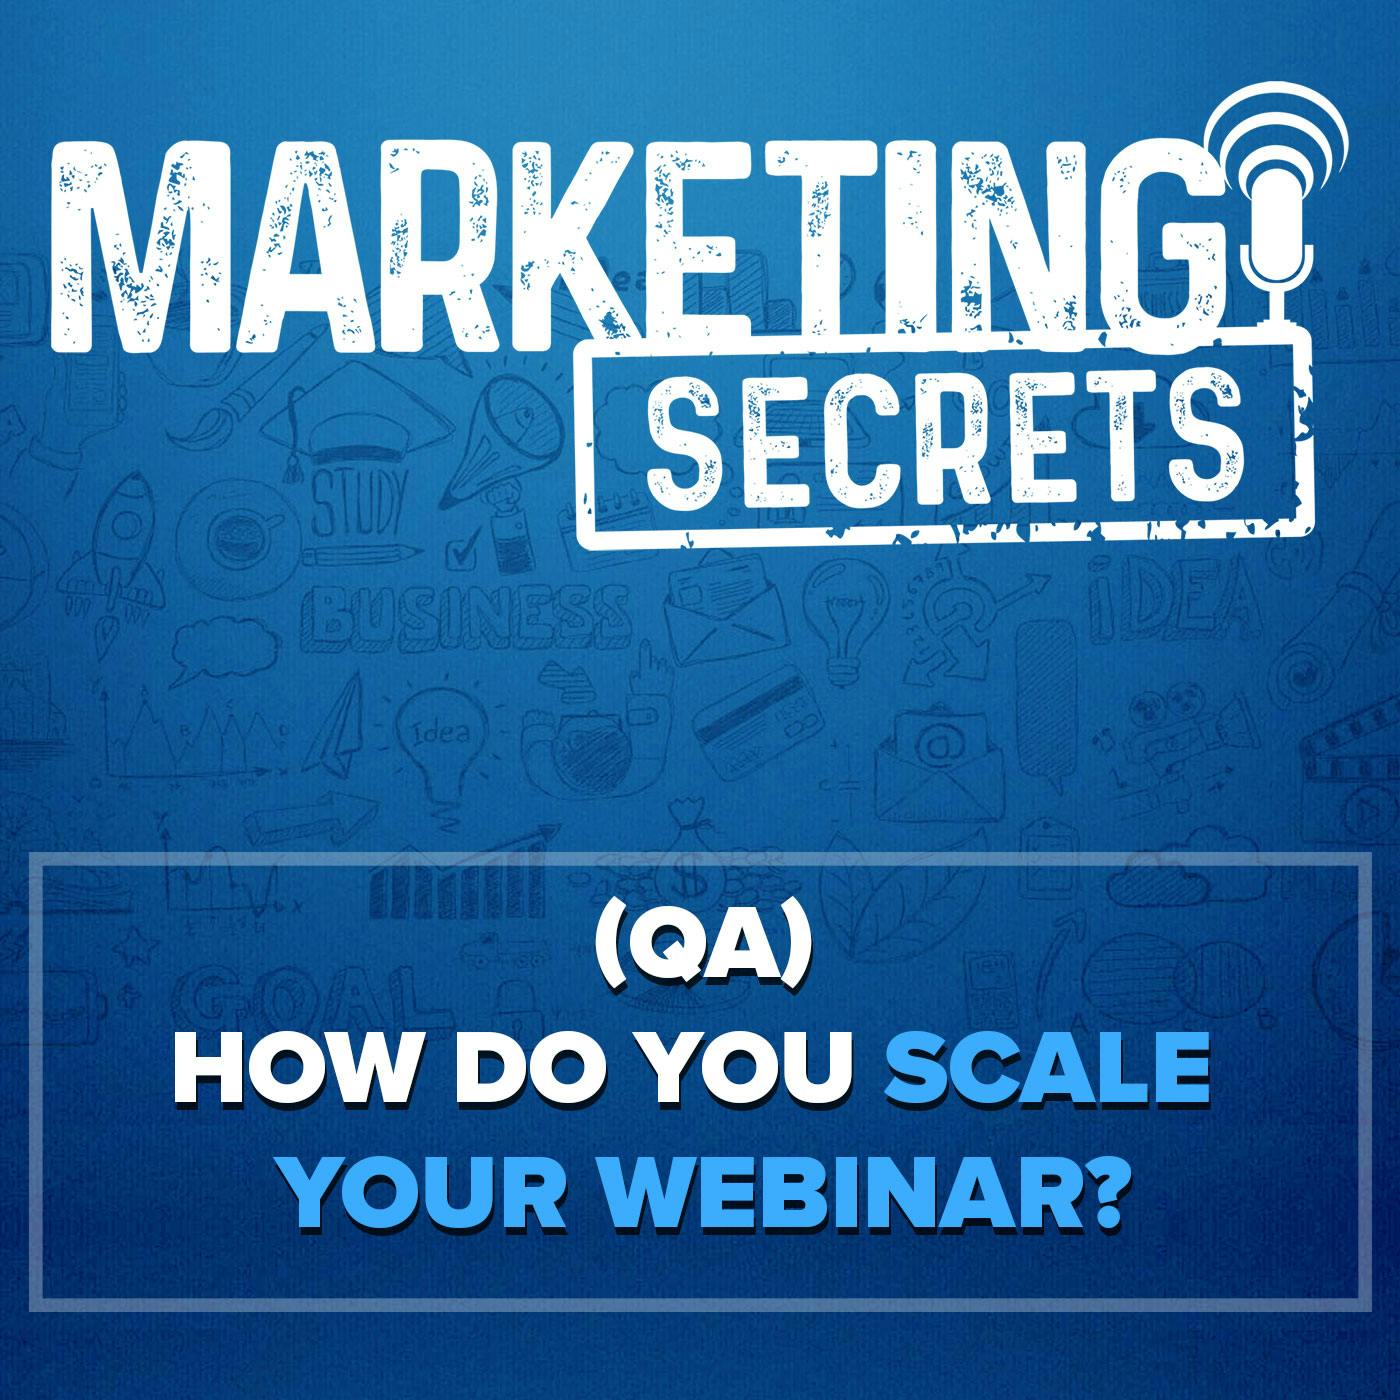 (Q&A) How Do You Scale Your Webinar?